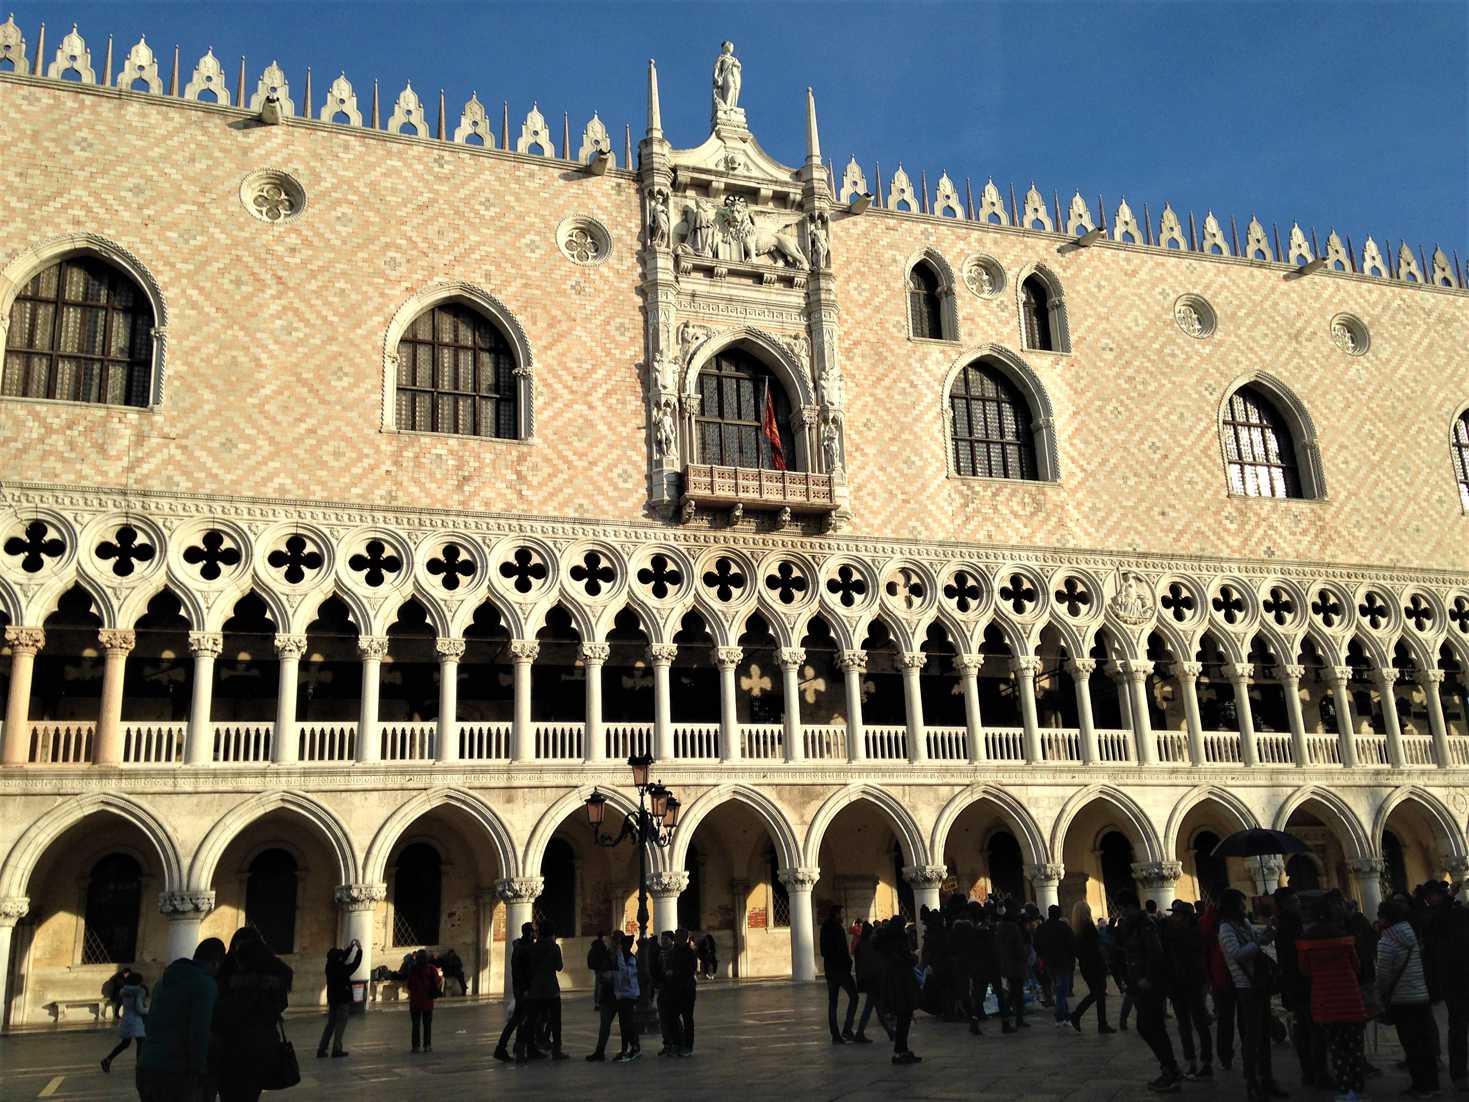 The ornate facade of the Doge's palace in Venice, Italy with a crowd of people standing outside.